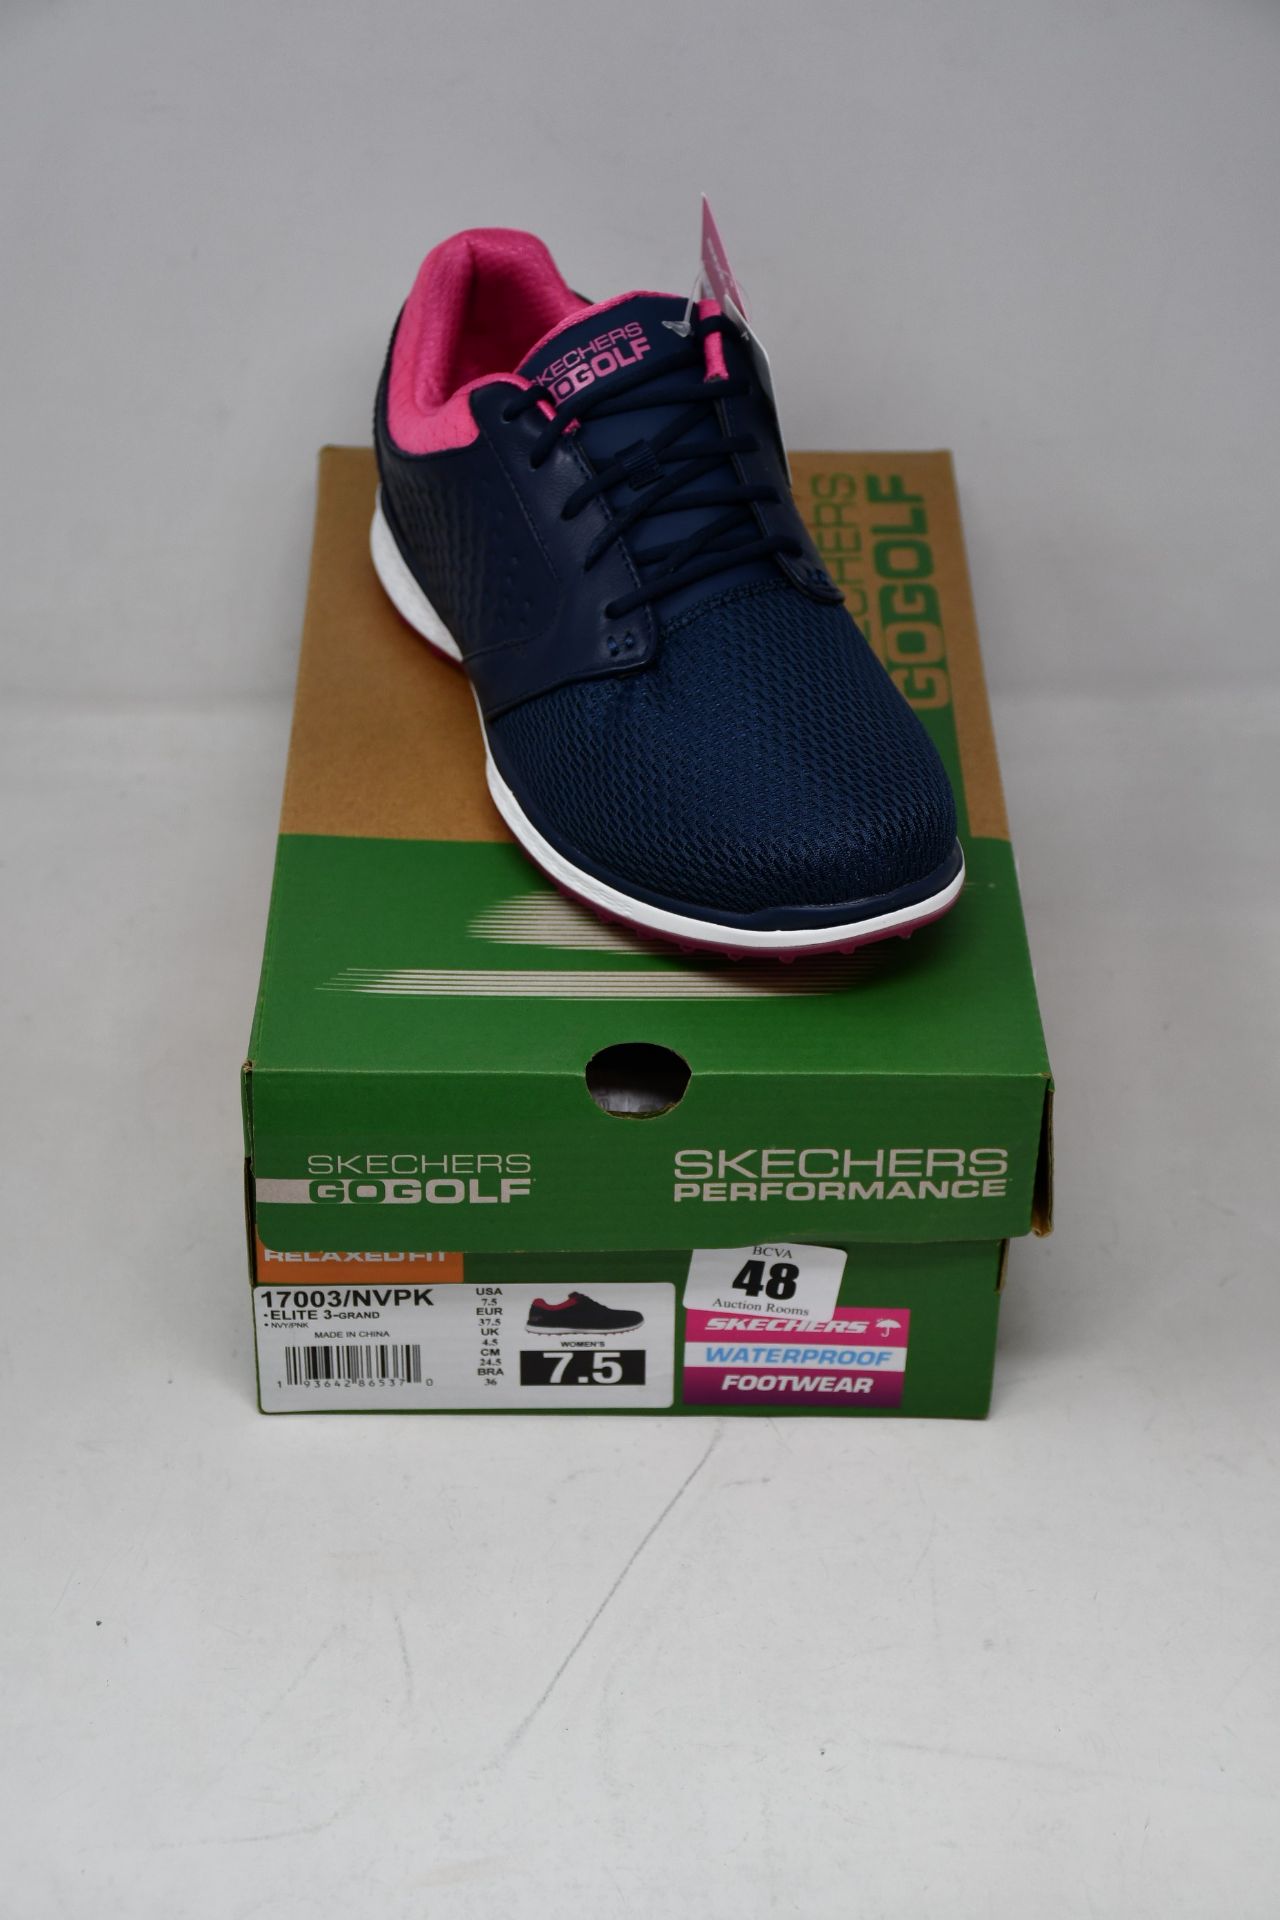 A pair of women's as new Skechers Go Golf Elite 3 Grand shoes (UK 4.5).